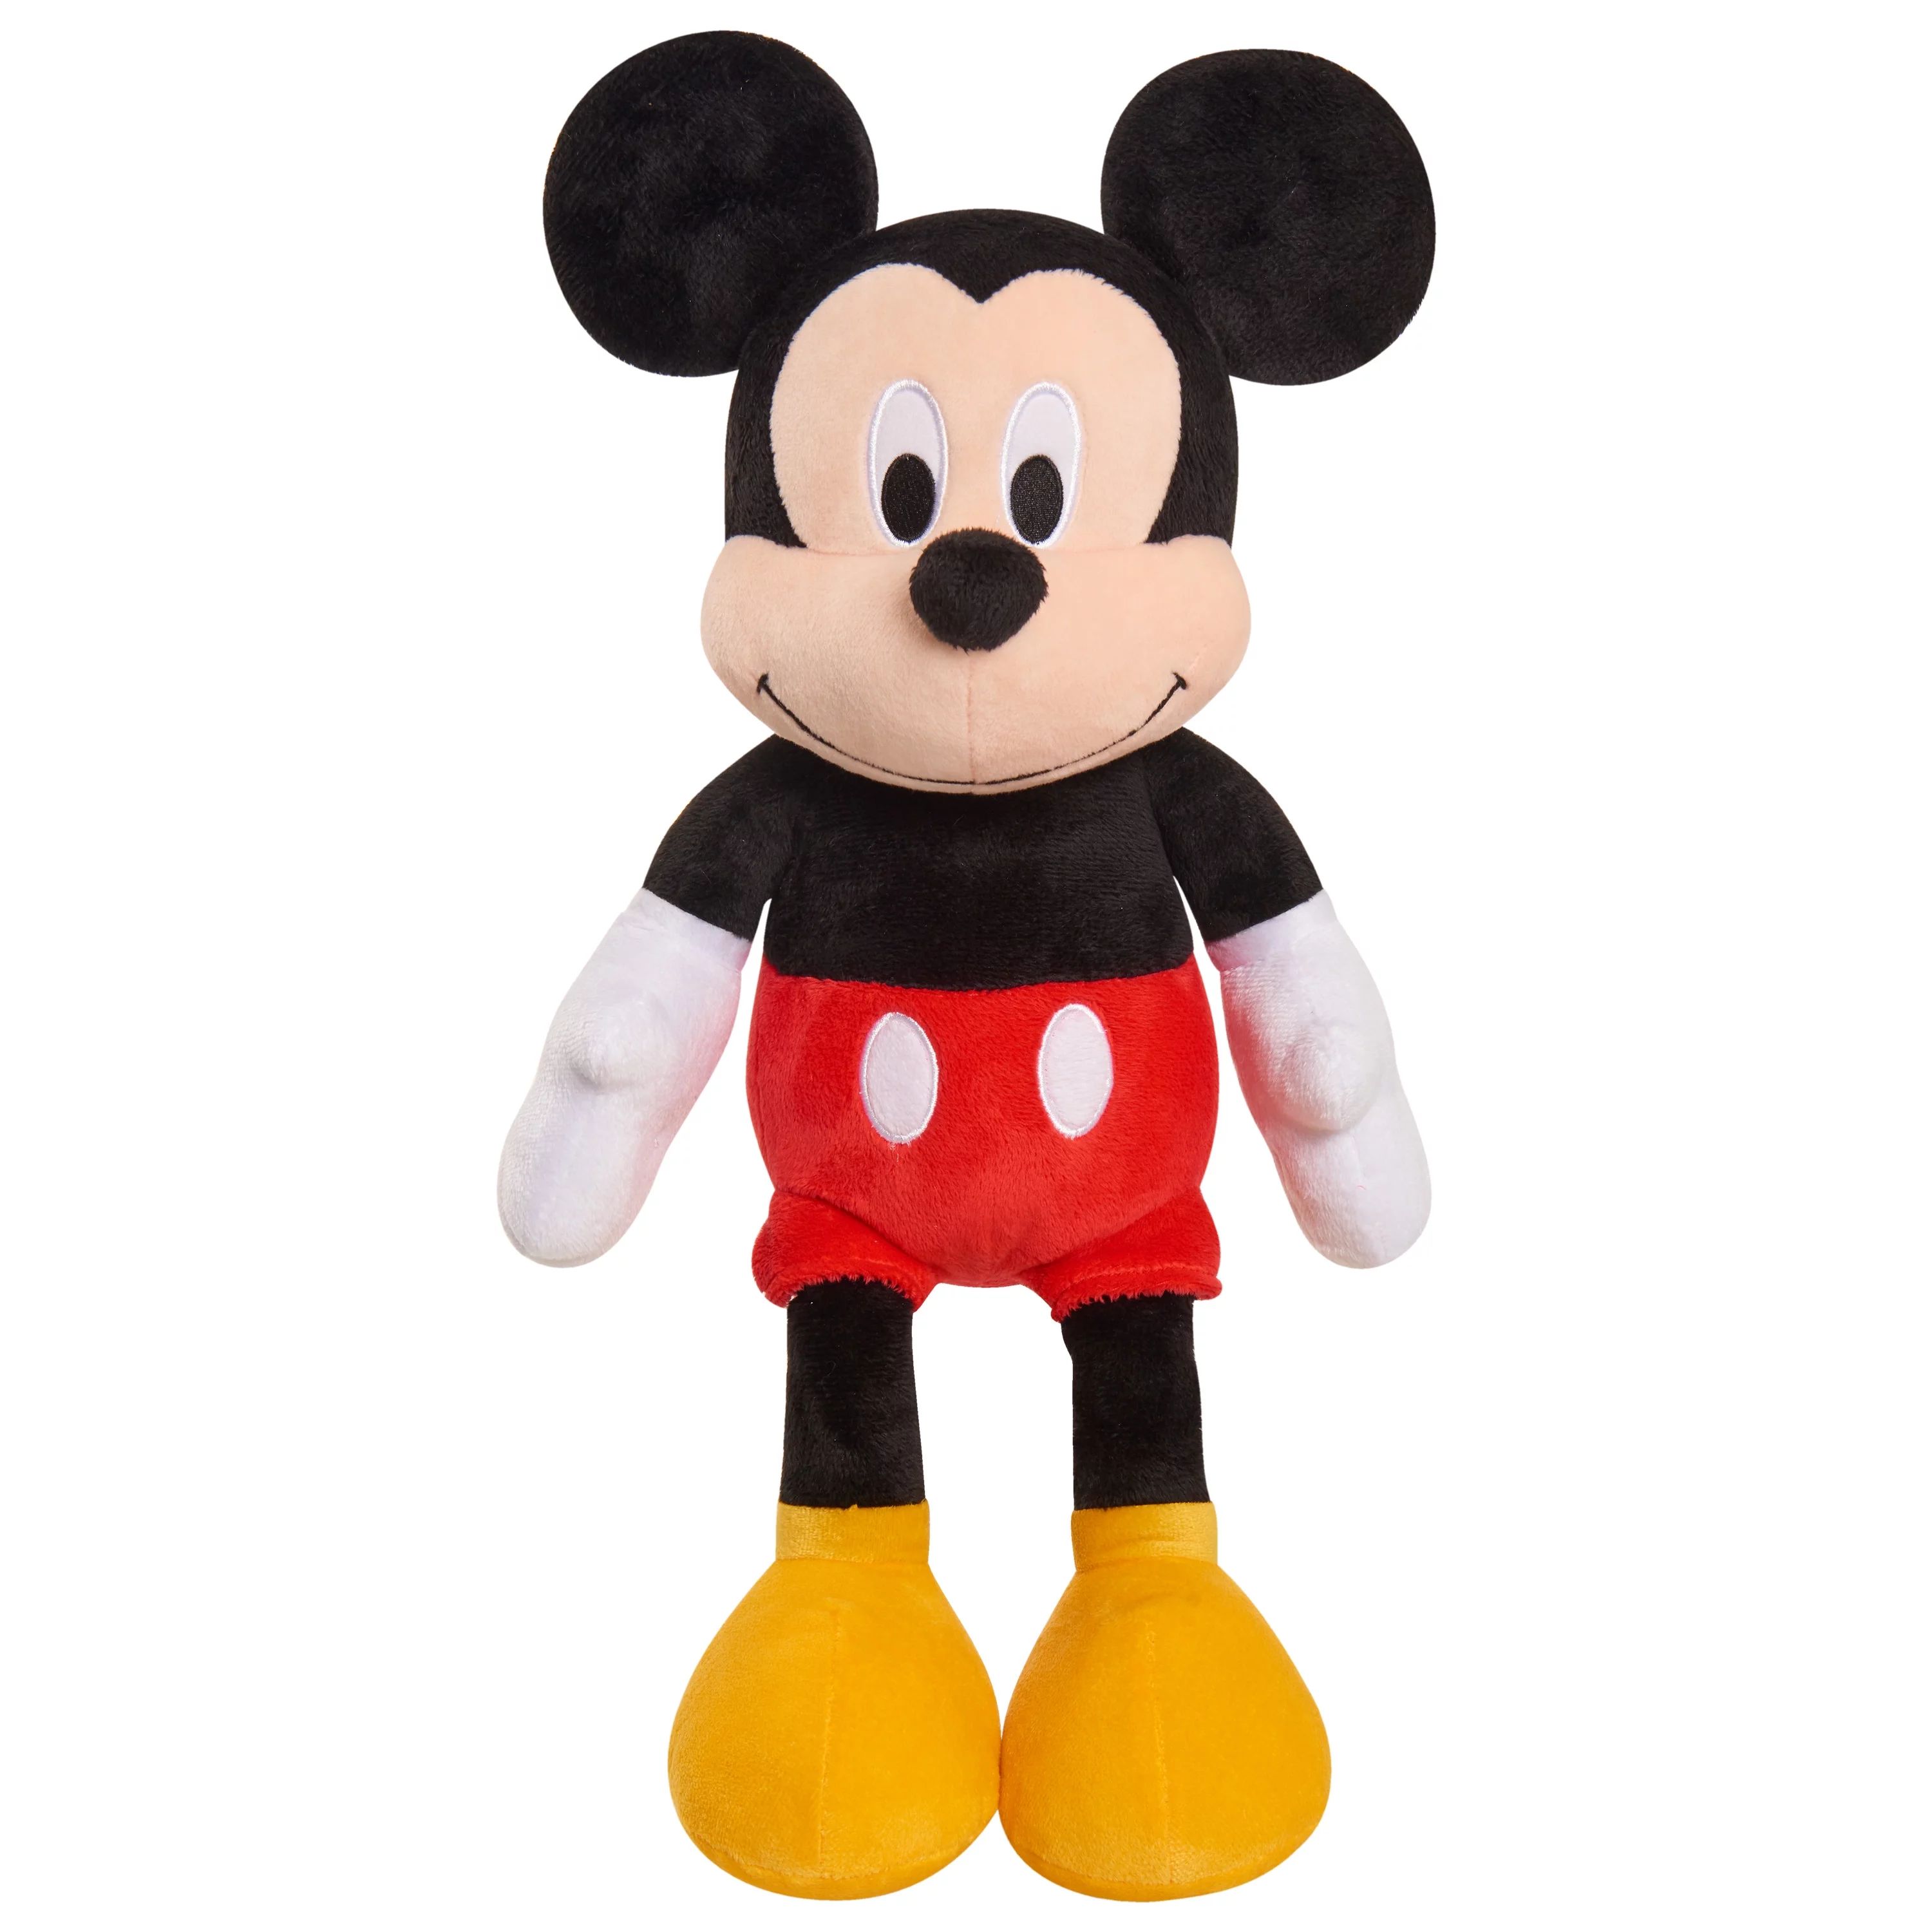 Disney Mickey Mouse 19-inch Plush Stuffed Animal, Kids Toys for Ages 2 up | Walmart (US)